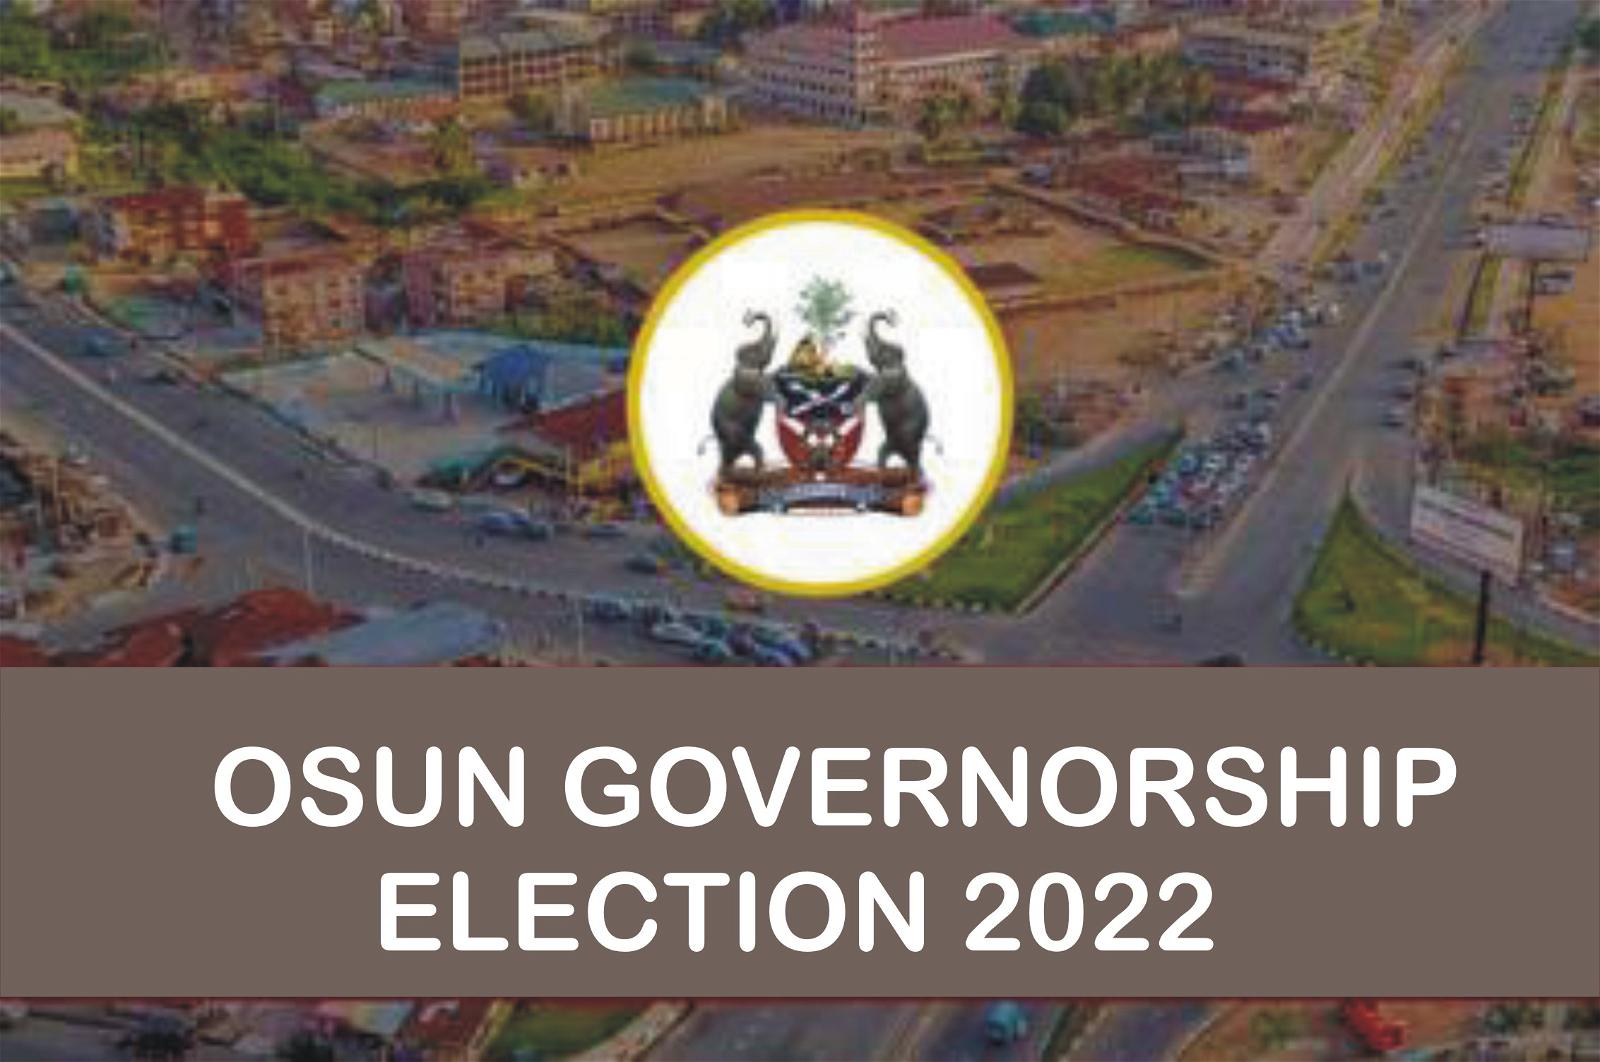 Osun Governorship Election: Full Results from 30 LGAs